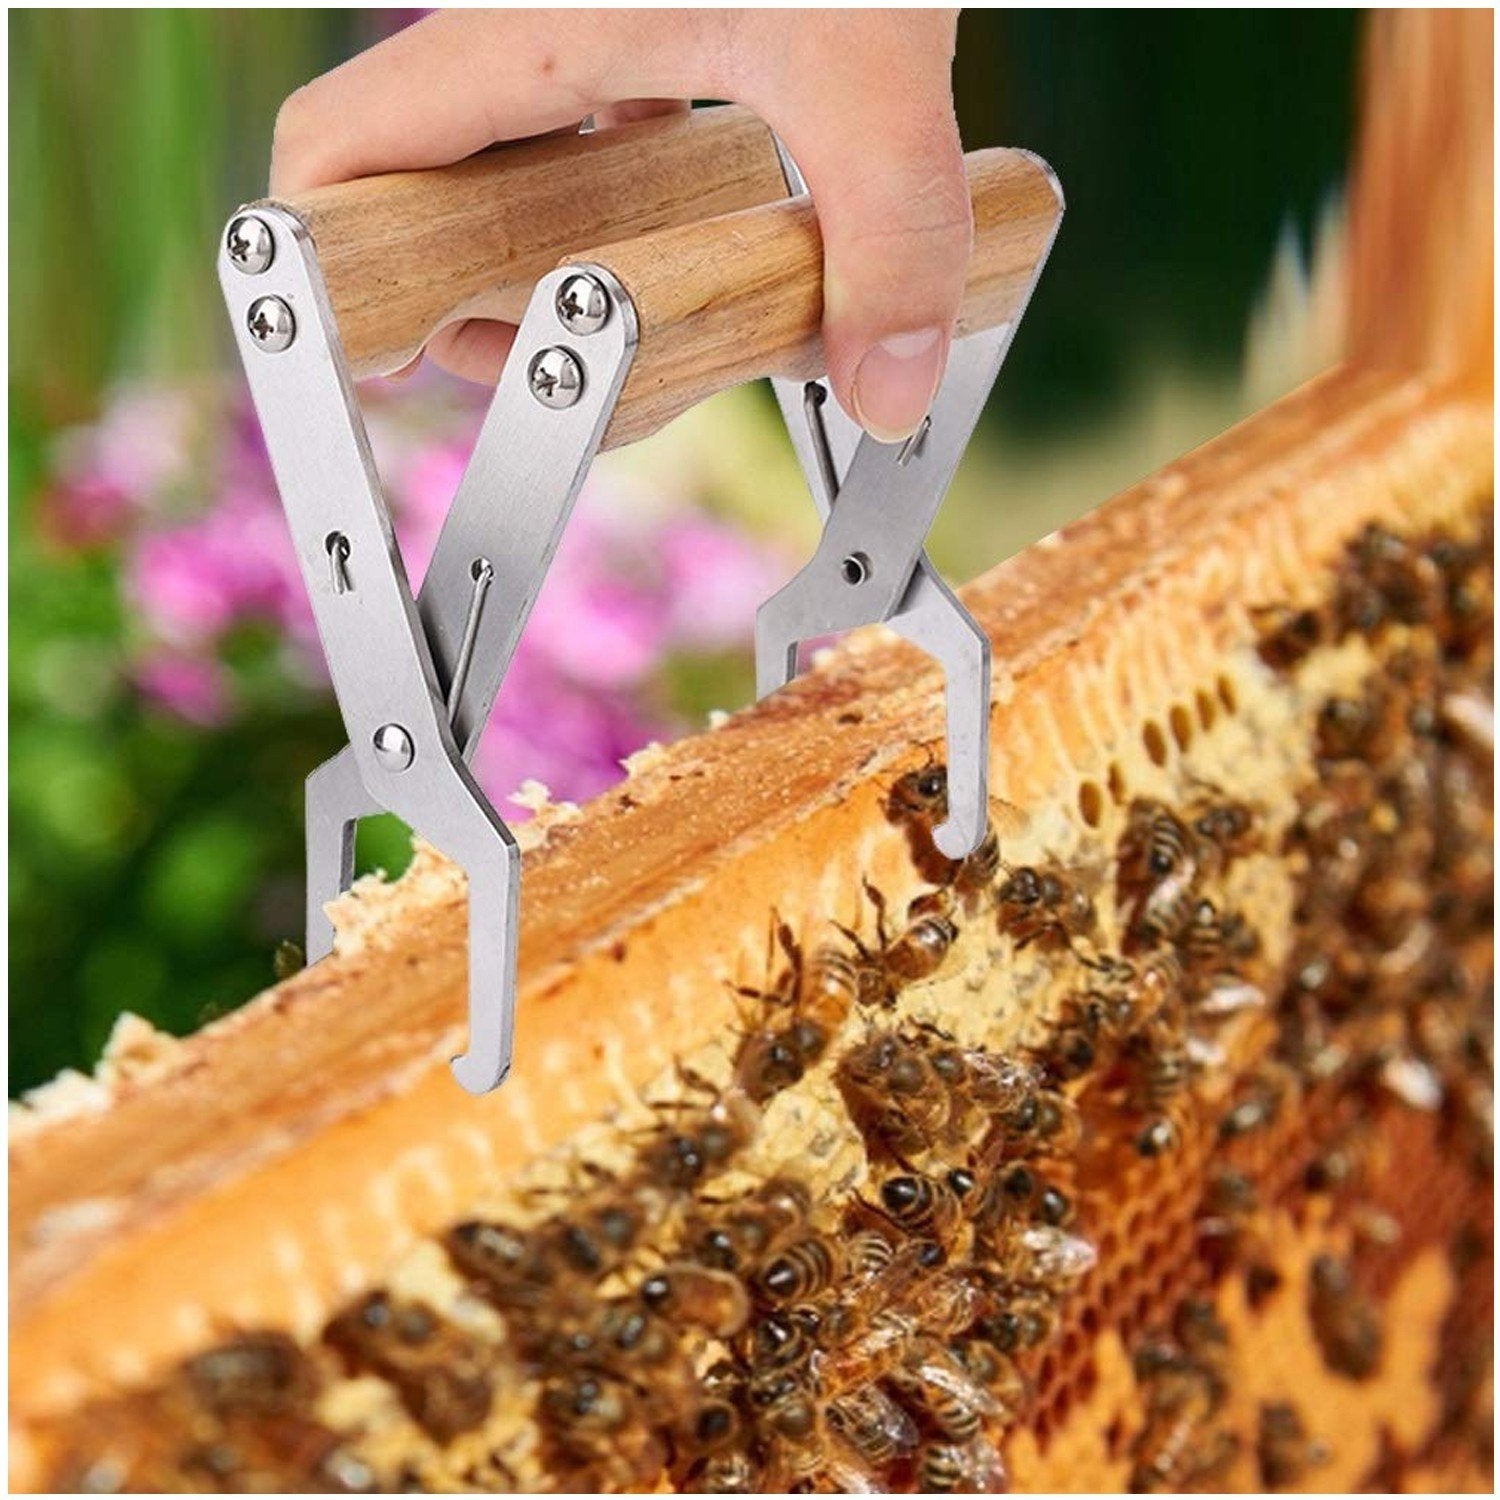 Beehive Frame Clip Wooden Handle Bee Nests Box Jig Griper Lifter Stainless Steel Nest Holder